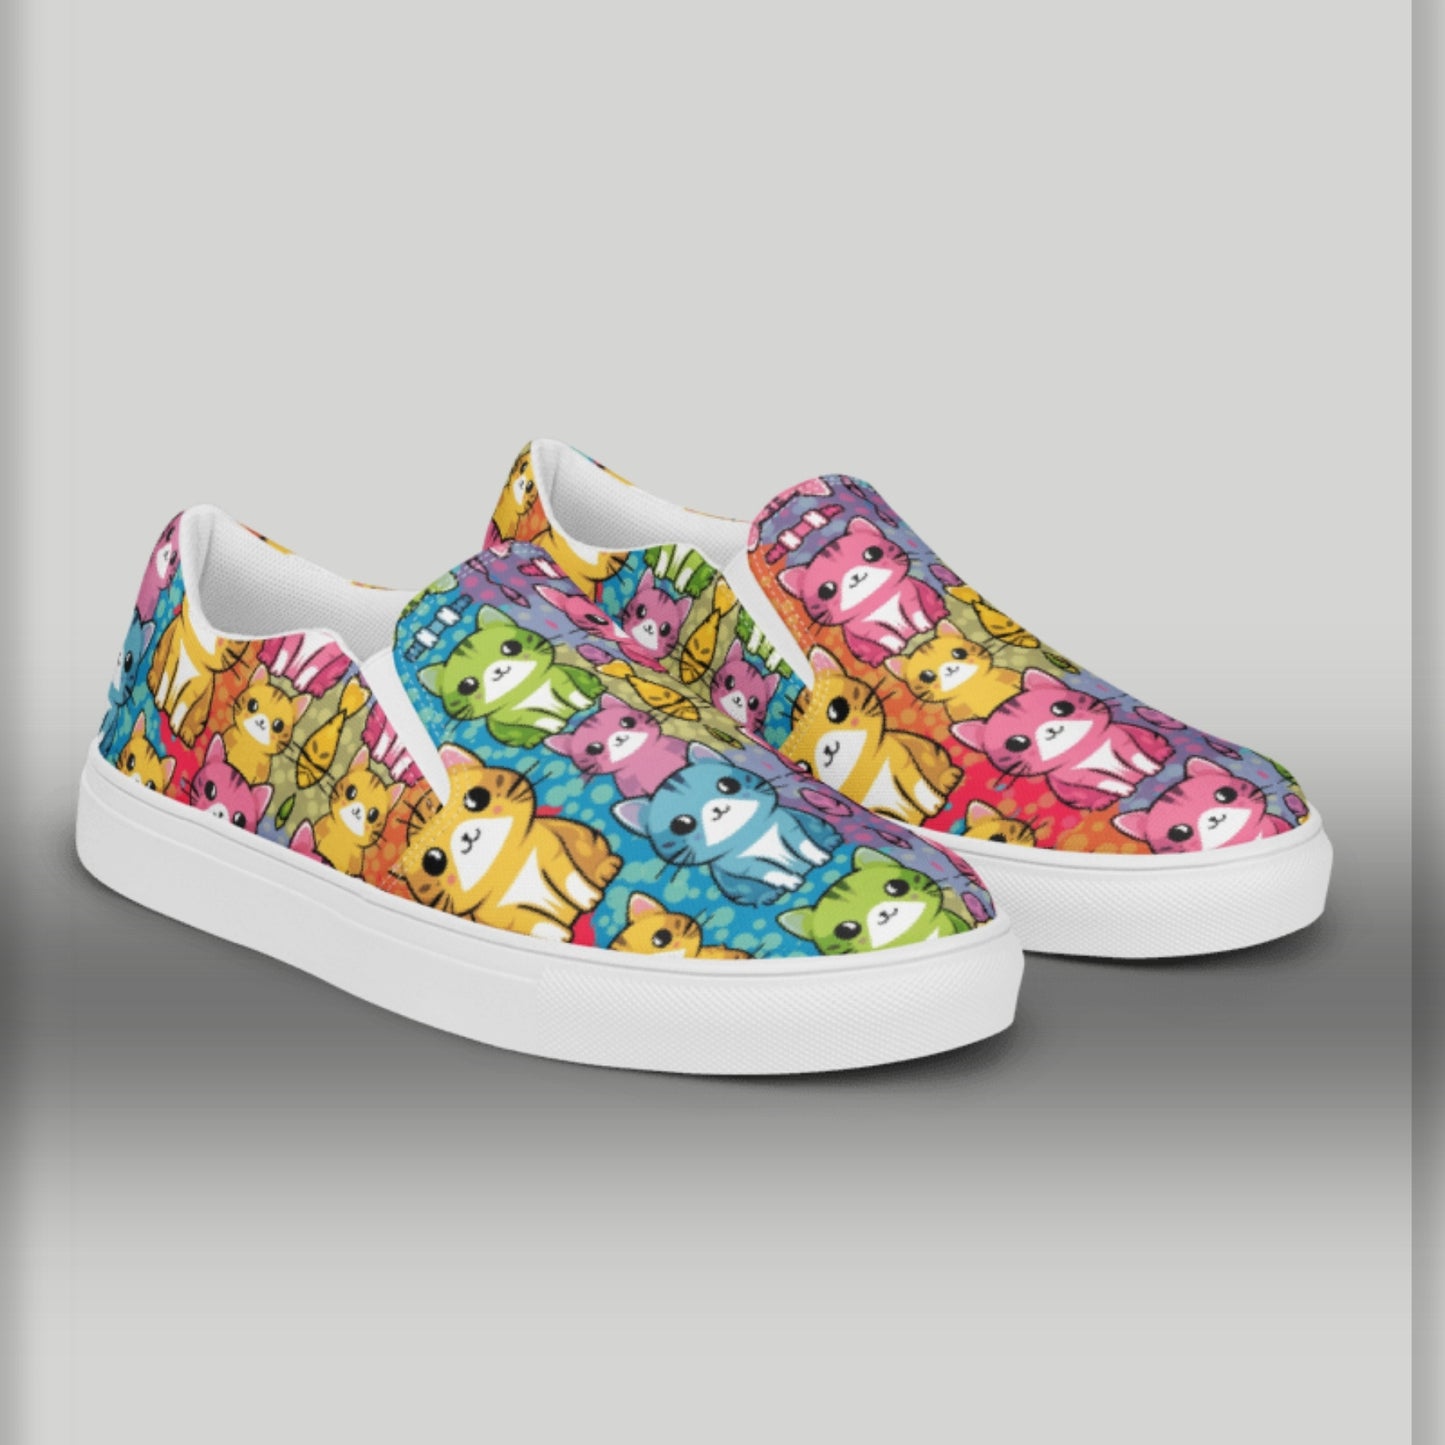 Colorful Kawaii Cats slip-on canvas shoes